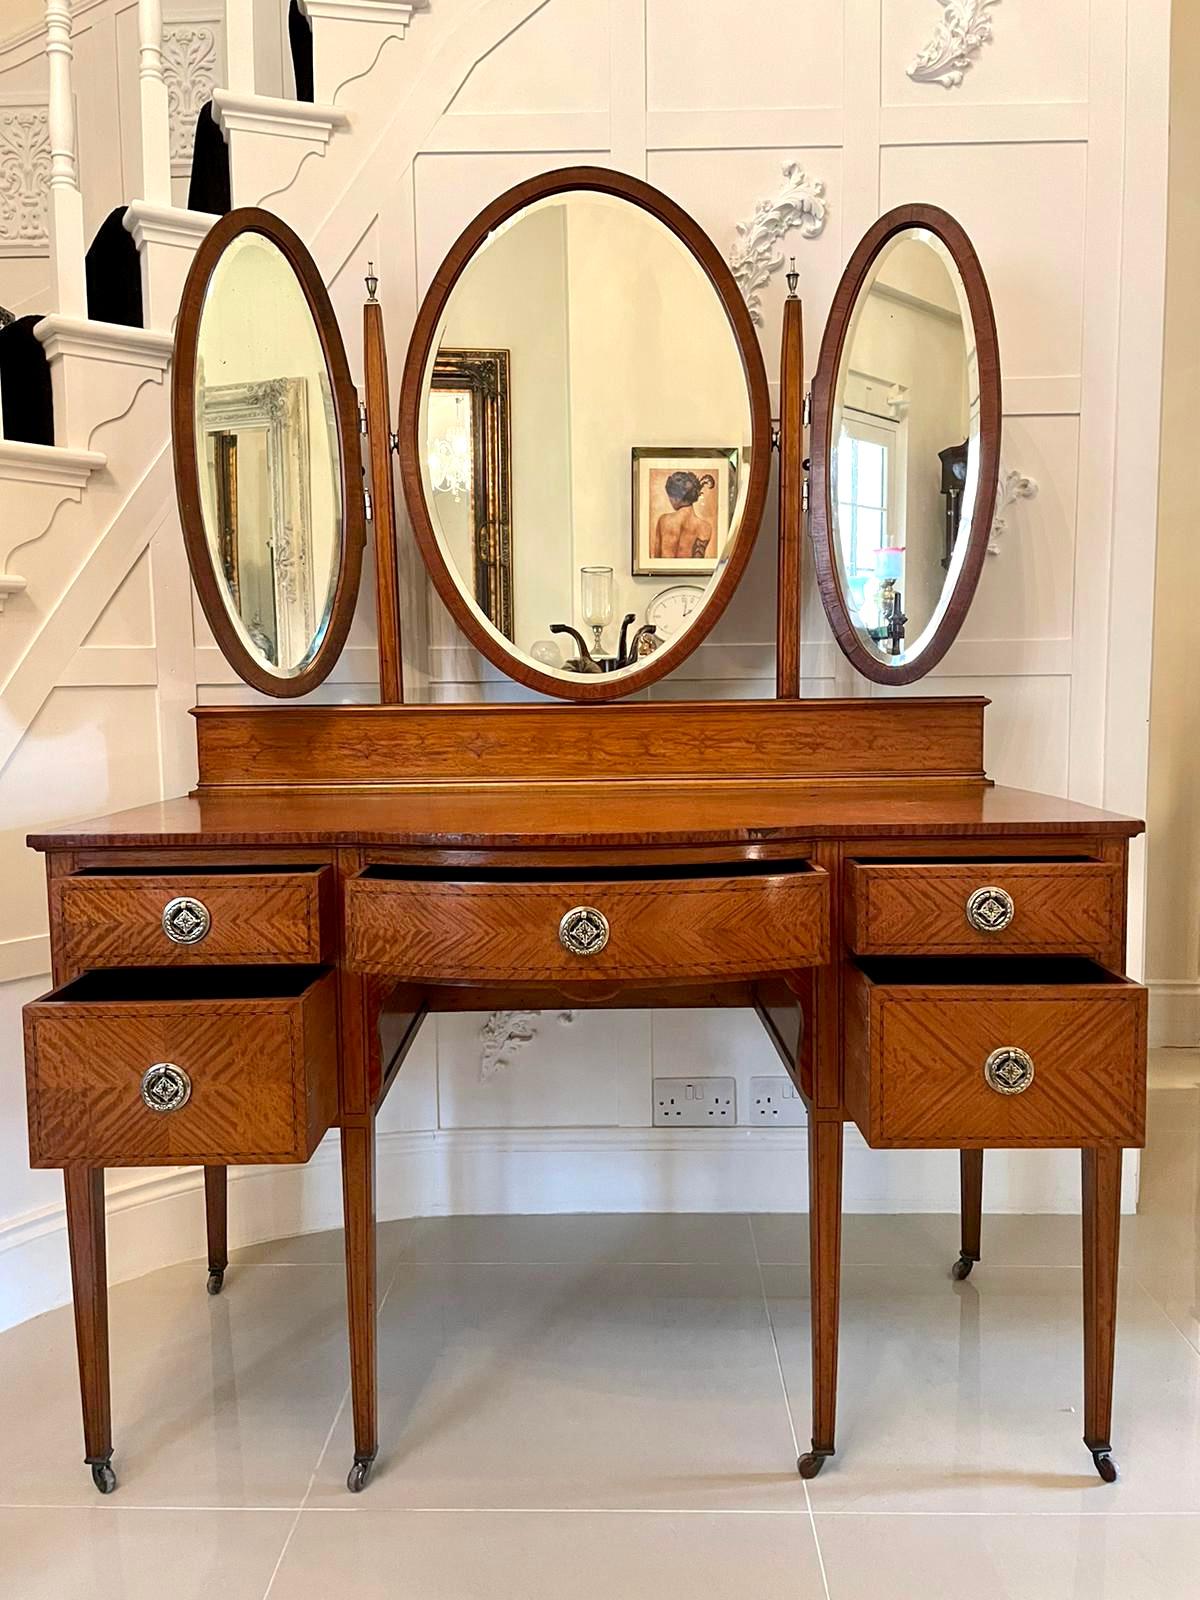 Fine antique inlaid satinwood dressing/vanity table having delightful stringing inlay throughout the entire satinwood piece. It boasts three oval tilting beveled edged mirrors with pretty oval inlaid satinwood frames supported by inlaid uprights